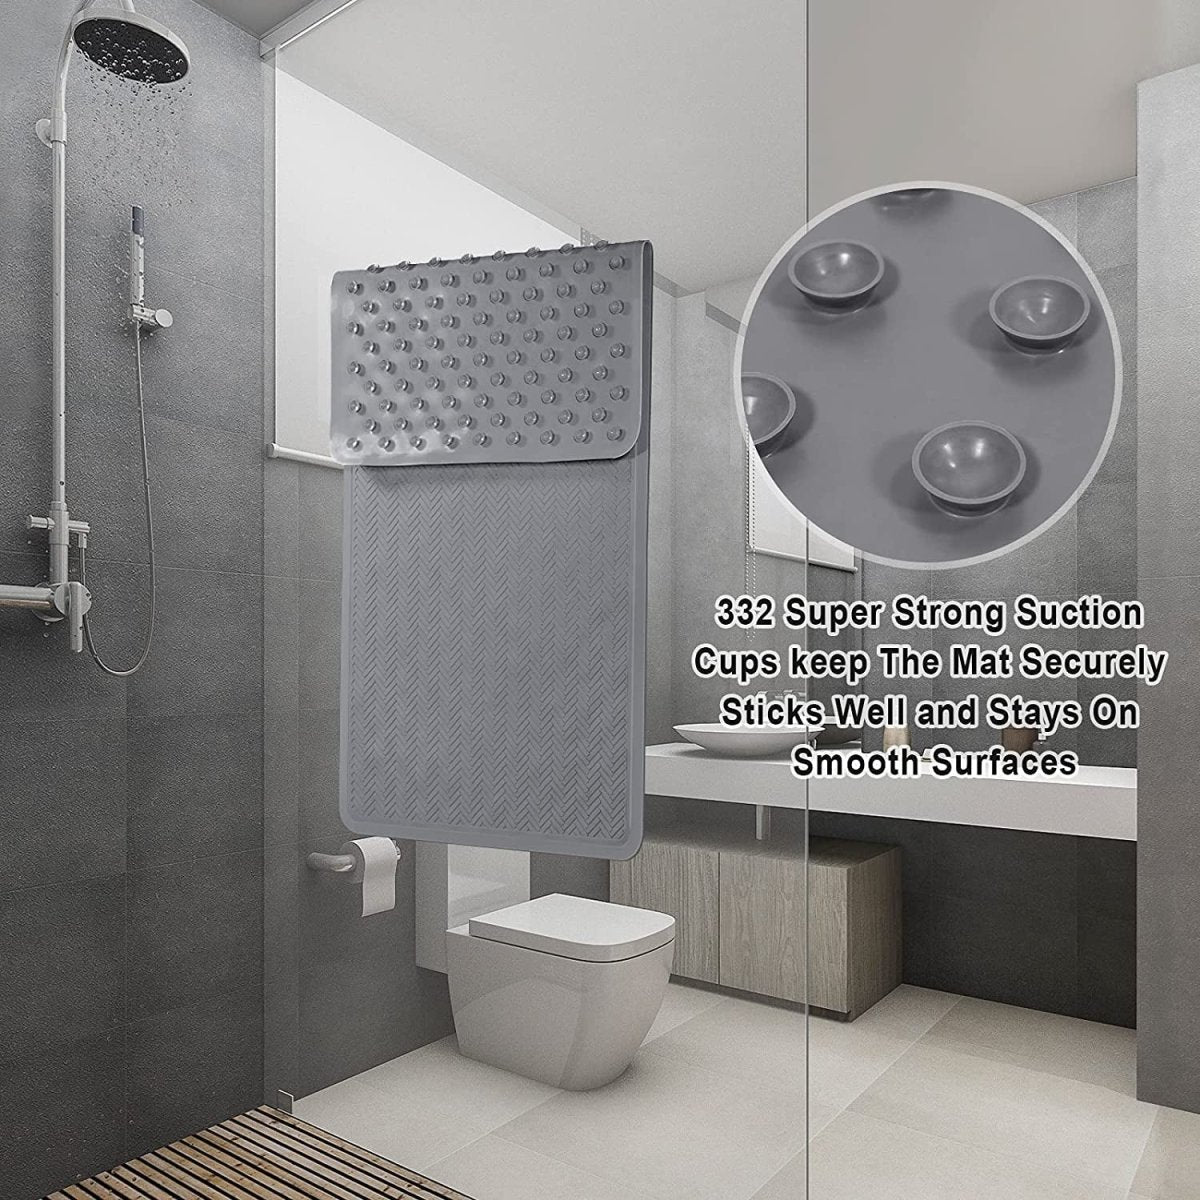 https://cdn.shopify.com/s/files/1/0619/6307/5793/products/extra-long-43x92-cm-rubber-non-slip-bathtub-shower-mat-soft-mat-for-bathroom-tub-with-strong-suction-cups-b9aa4ee3-e1d8-469a-b4c1-b7b4f726fe9d-153073.jpg?v=1683321170&width=1200